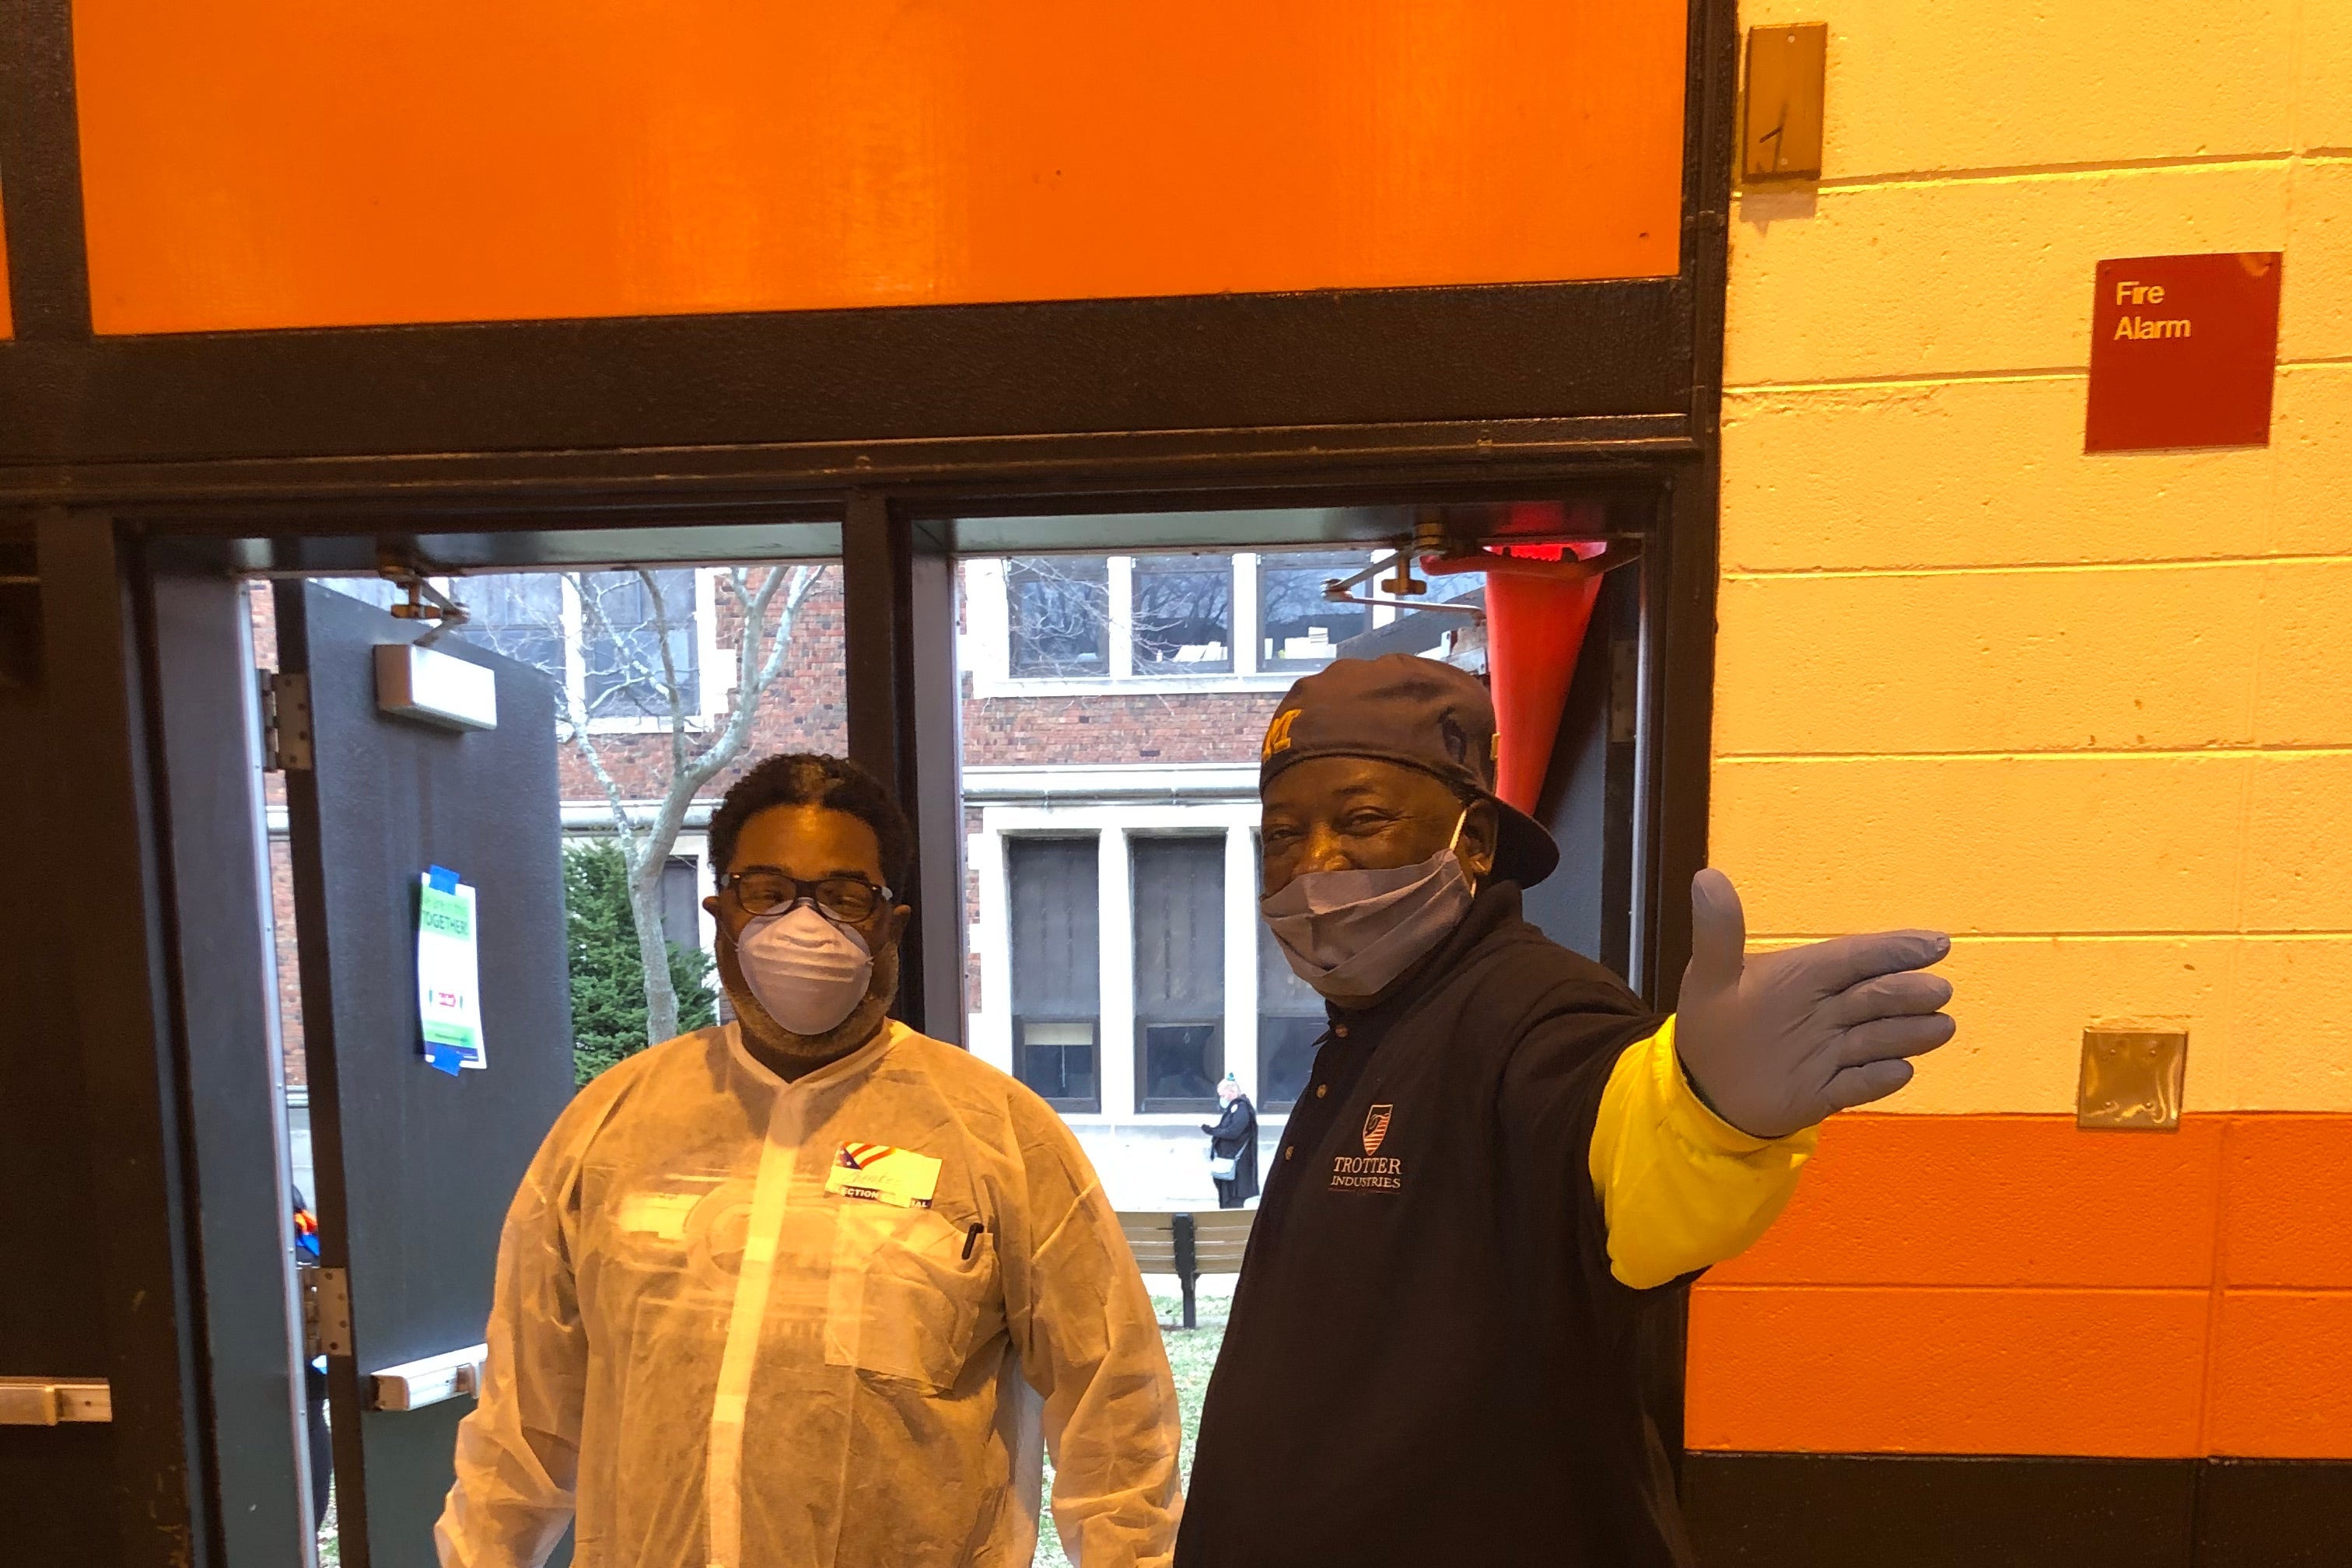 Poll workers in gowns, gloves, and masks stand by a door